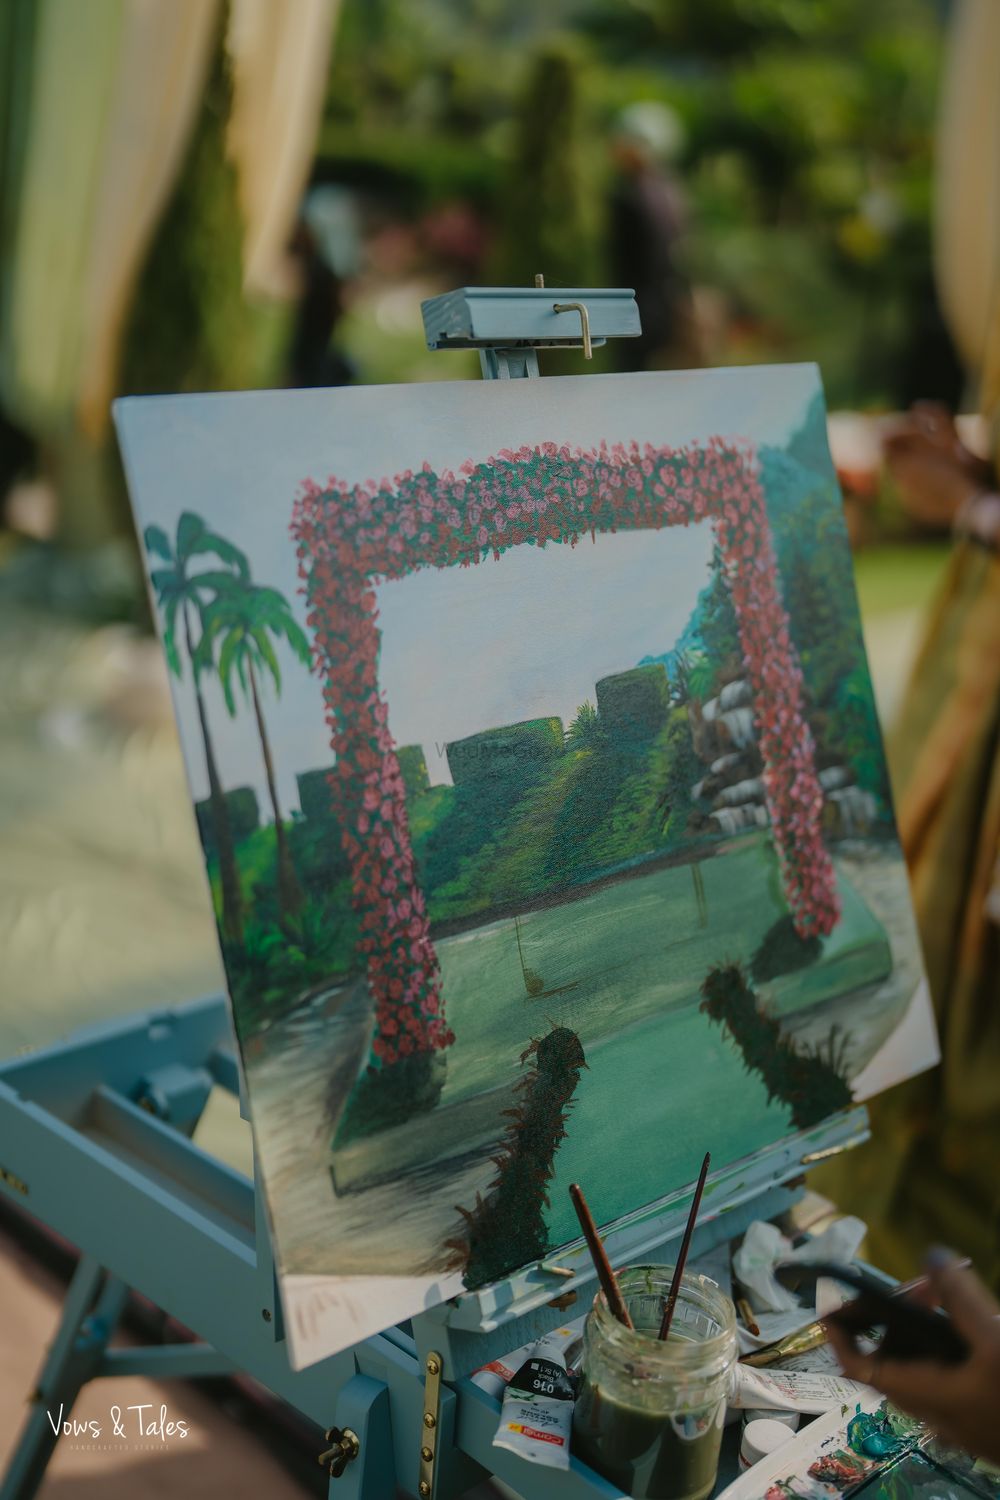 Photo of A live painting idea for capturing the wedding day in a unique way